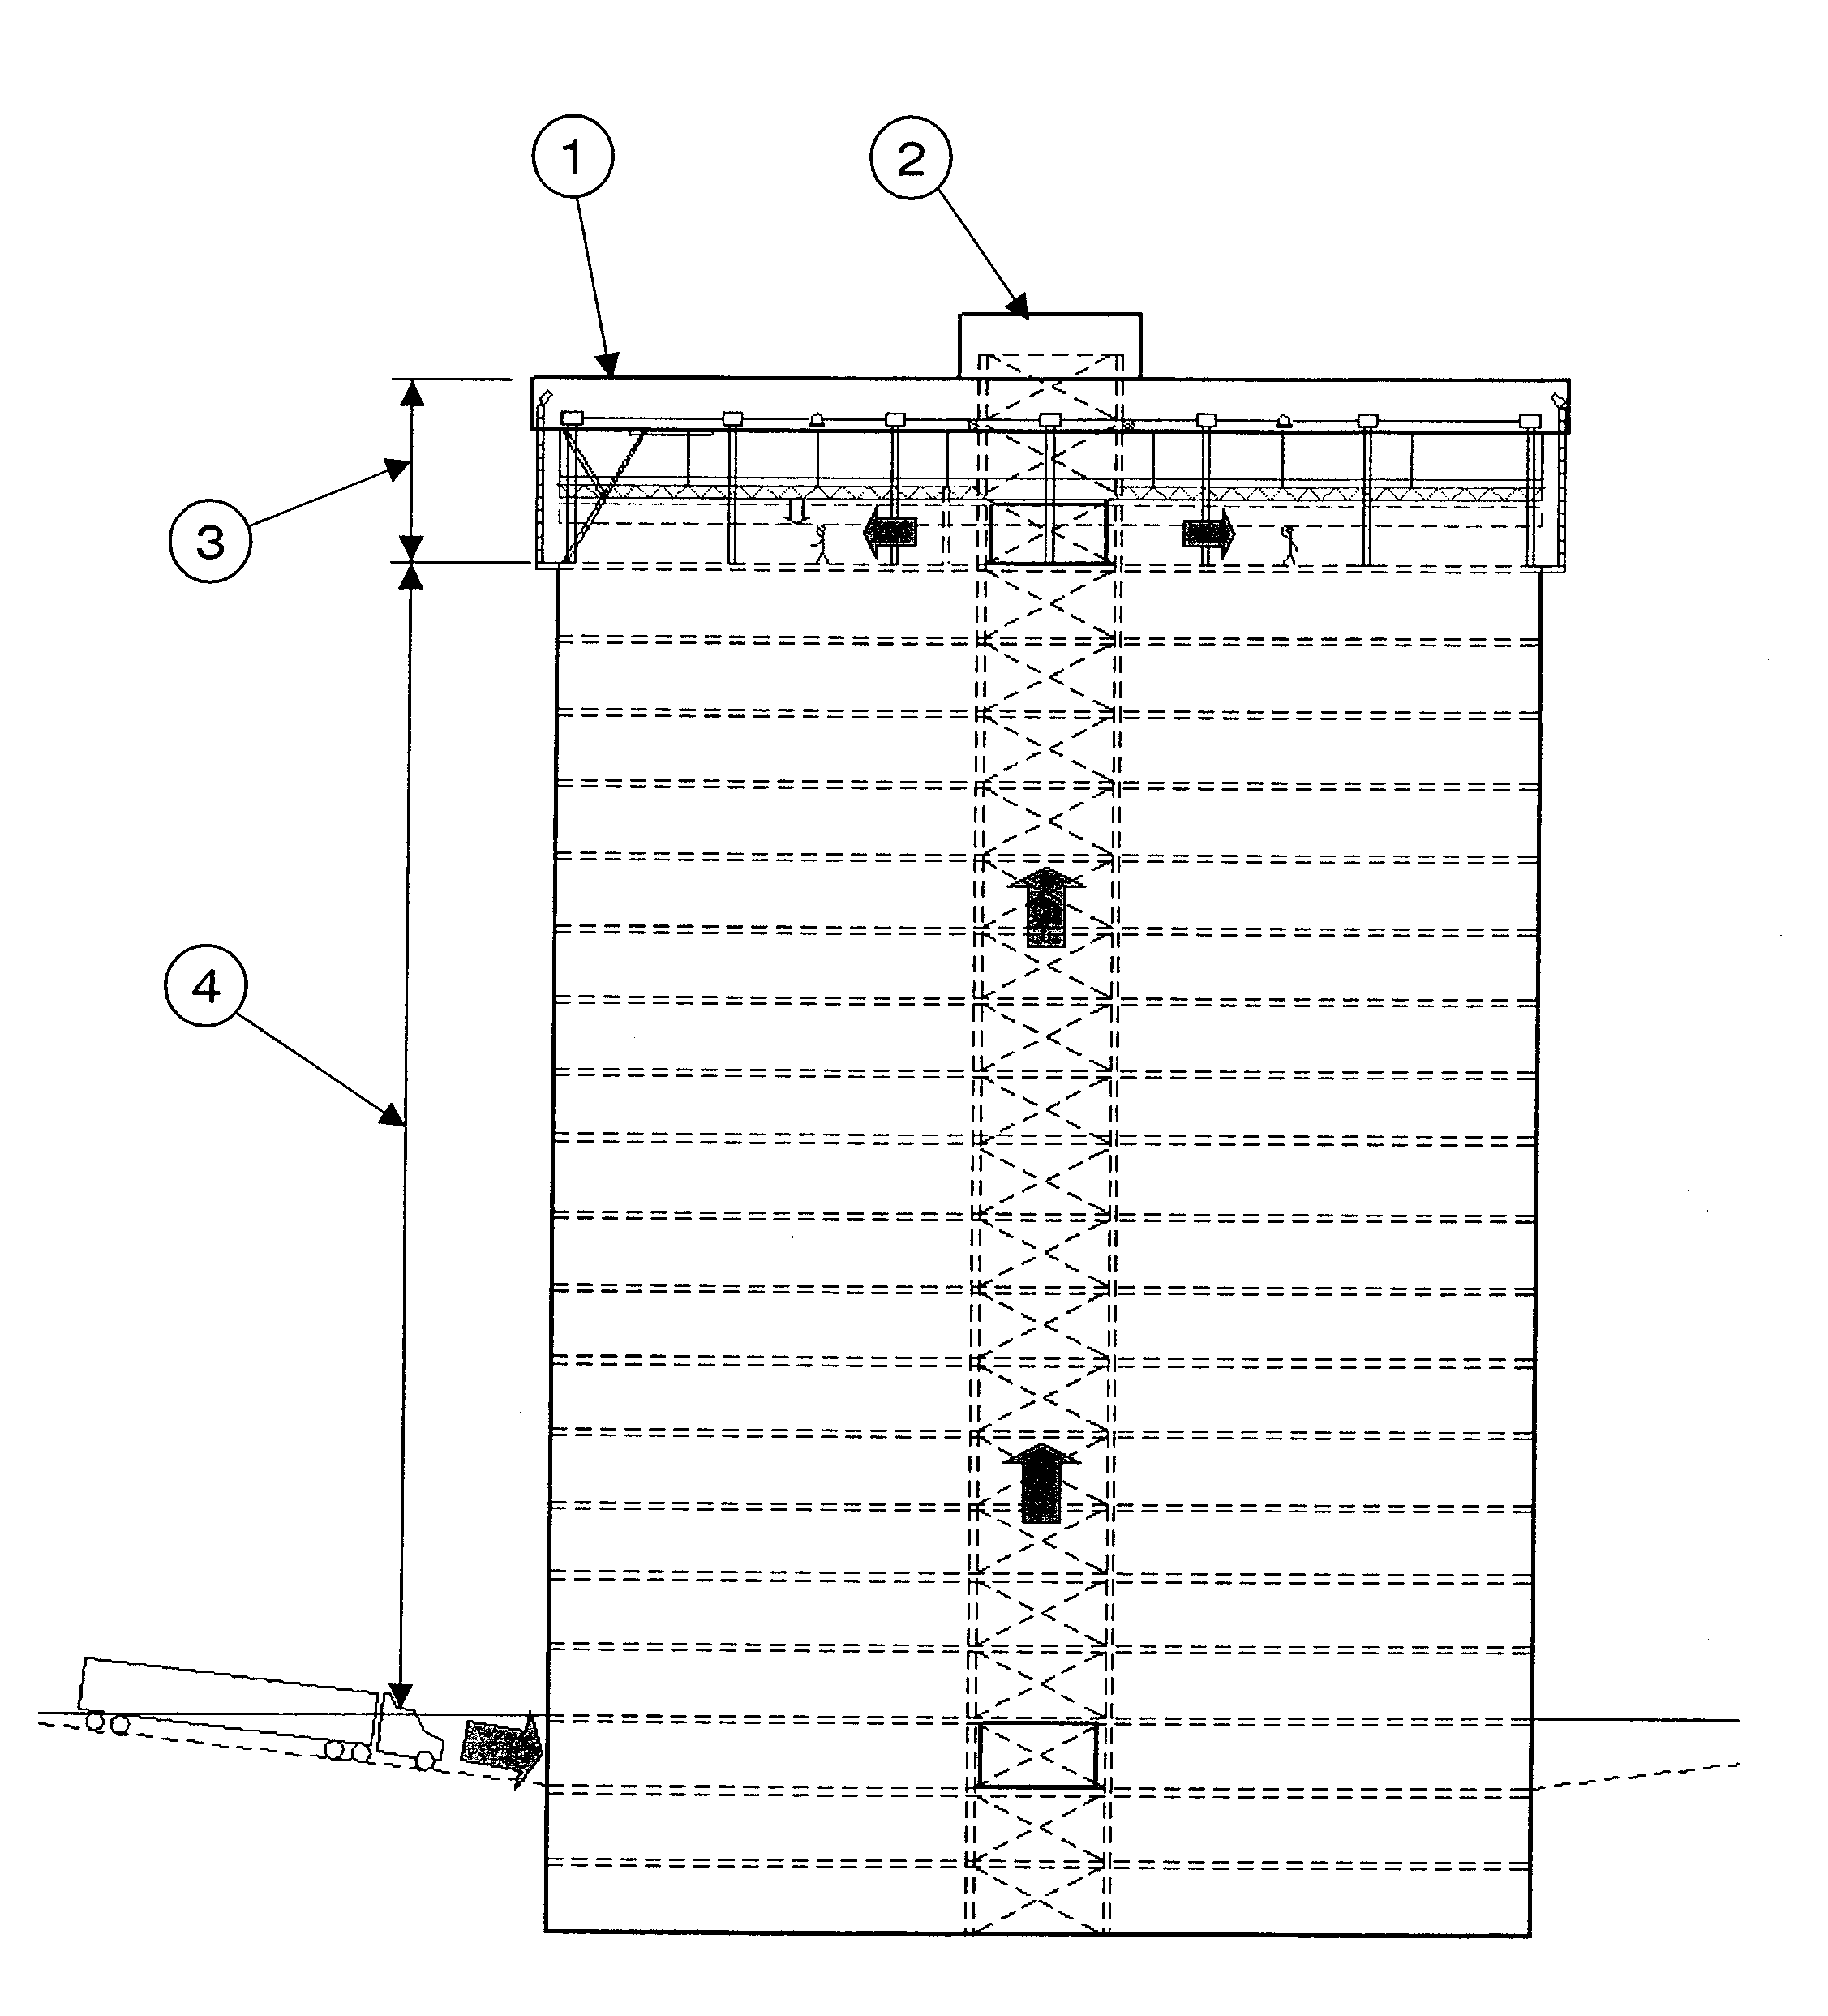 Construction system and method for multi-floor buildings